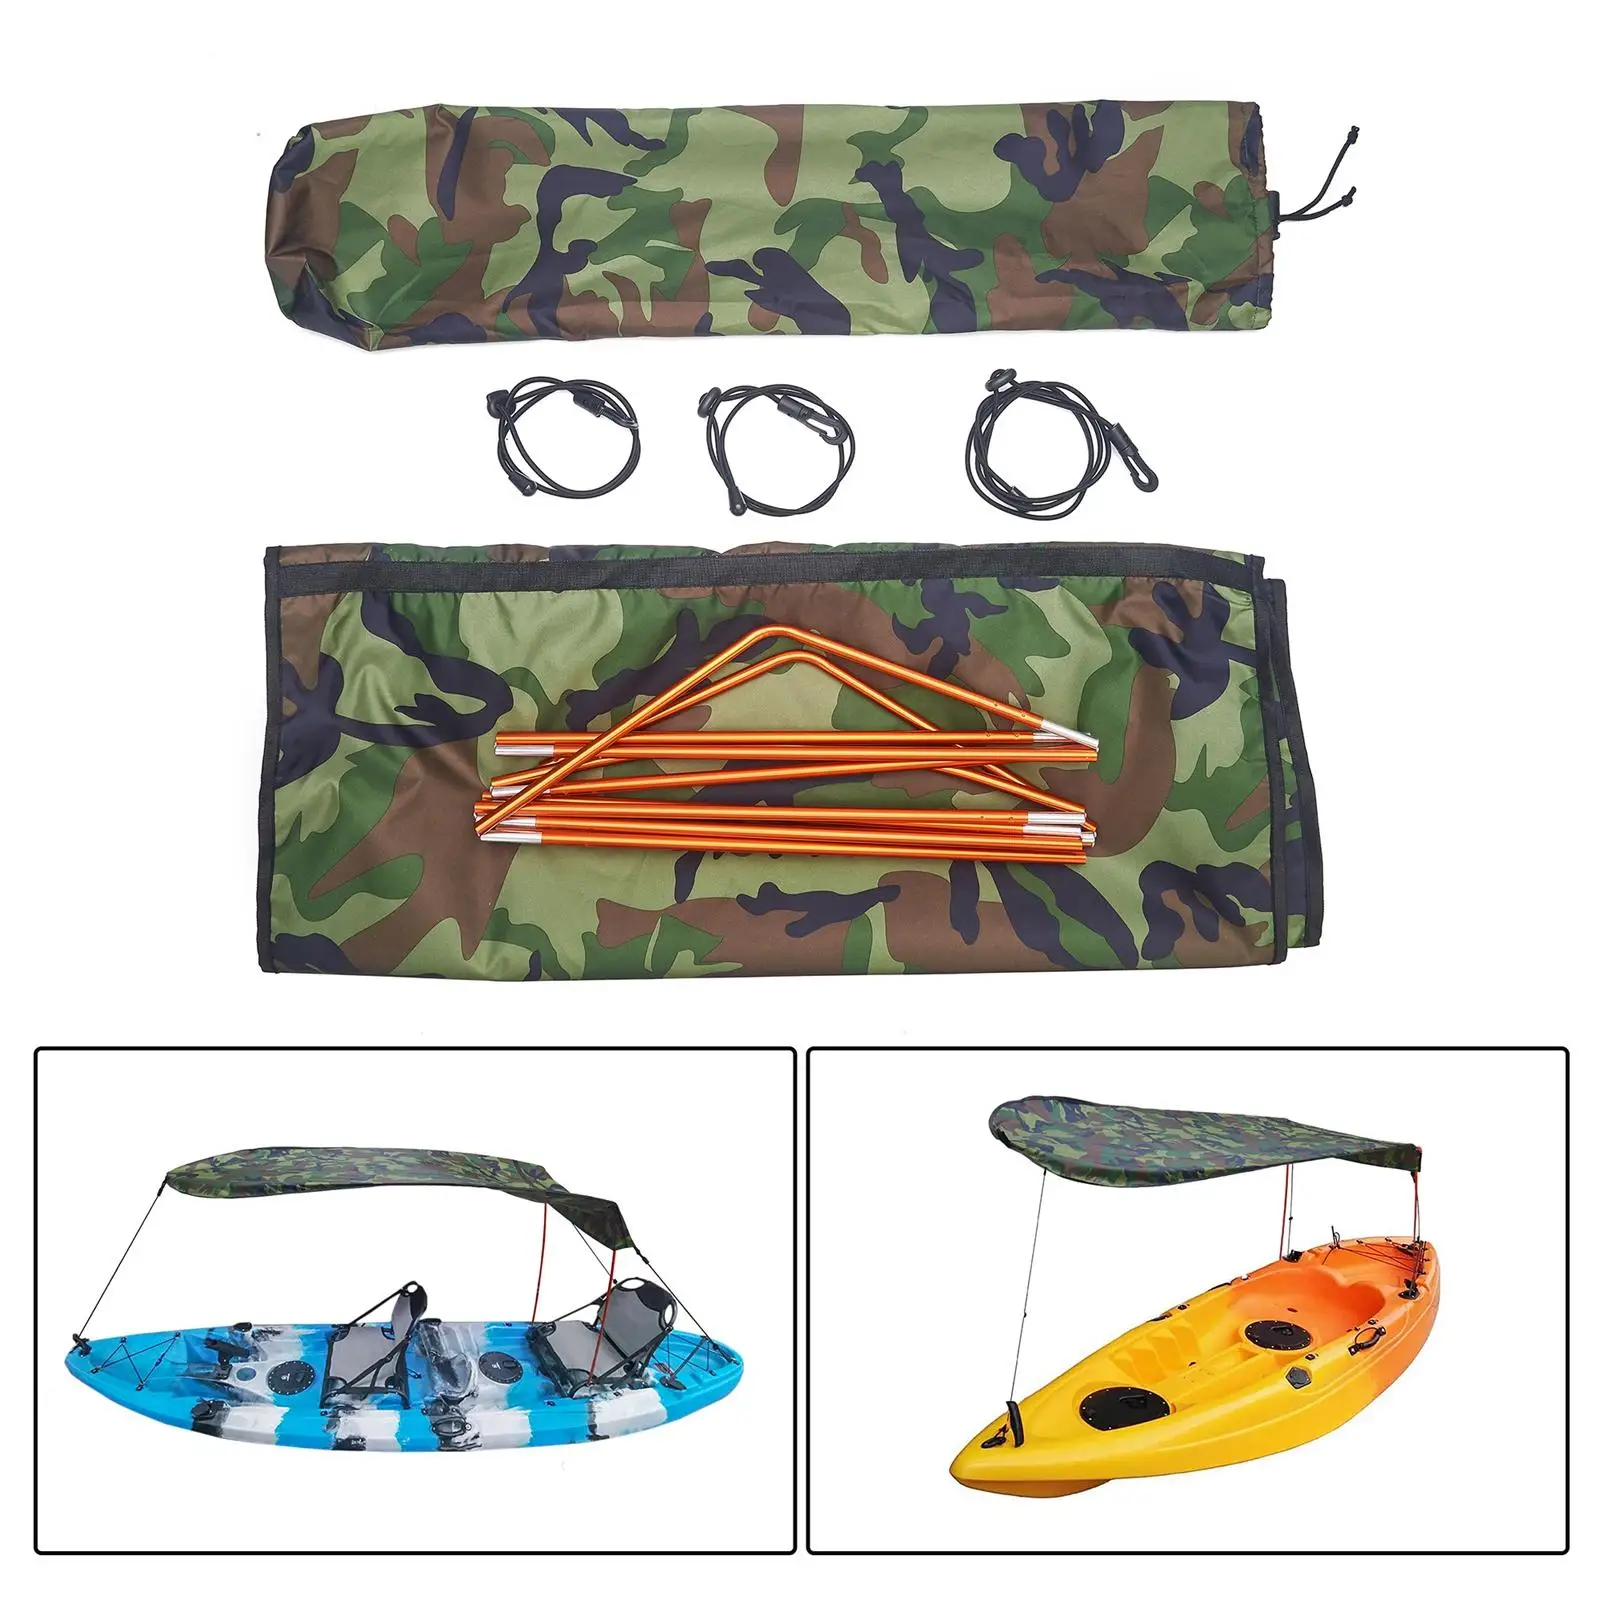 Portable Kayak Boat  Awning Sun Shade Top Cover Tent Canopy for